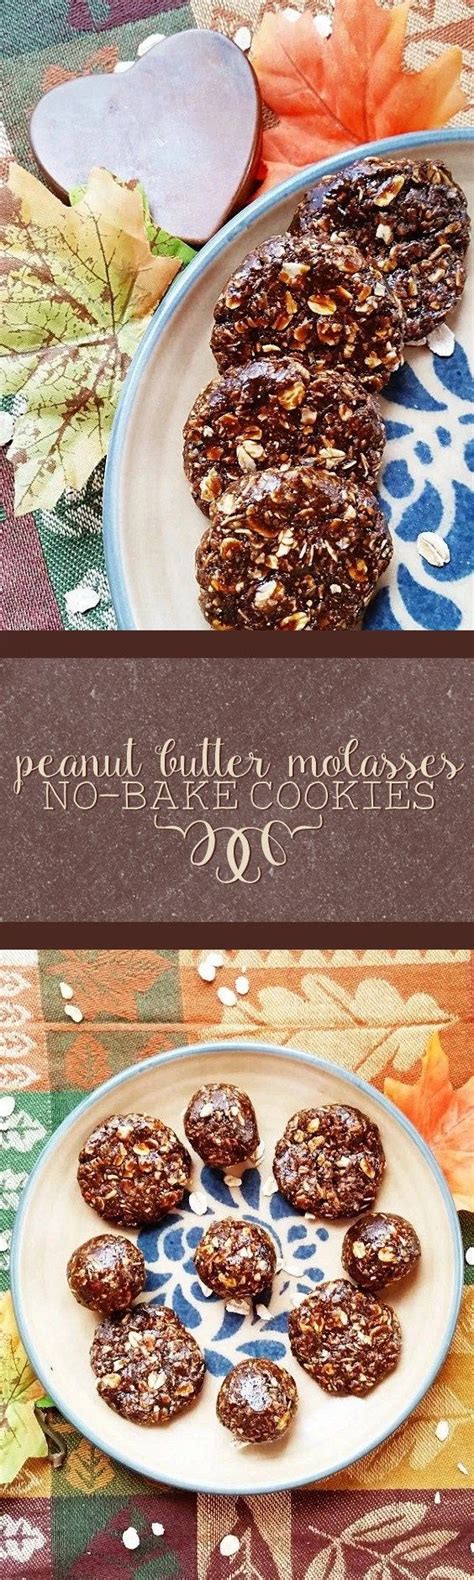 When layered in your favorite decorative tin, these festive molasses cookies also make for a great holiday gift. Peanut Butter Molasses No-Bake Cookies | Peanut butter ...